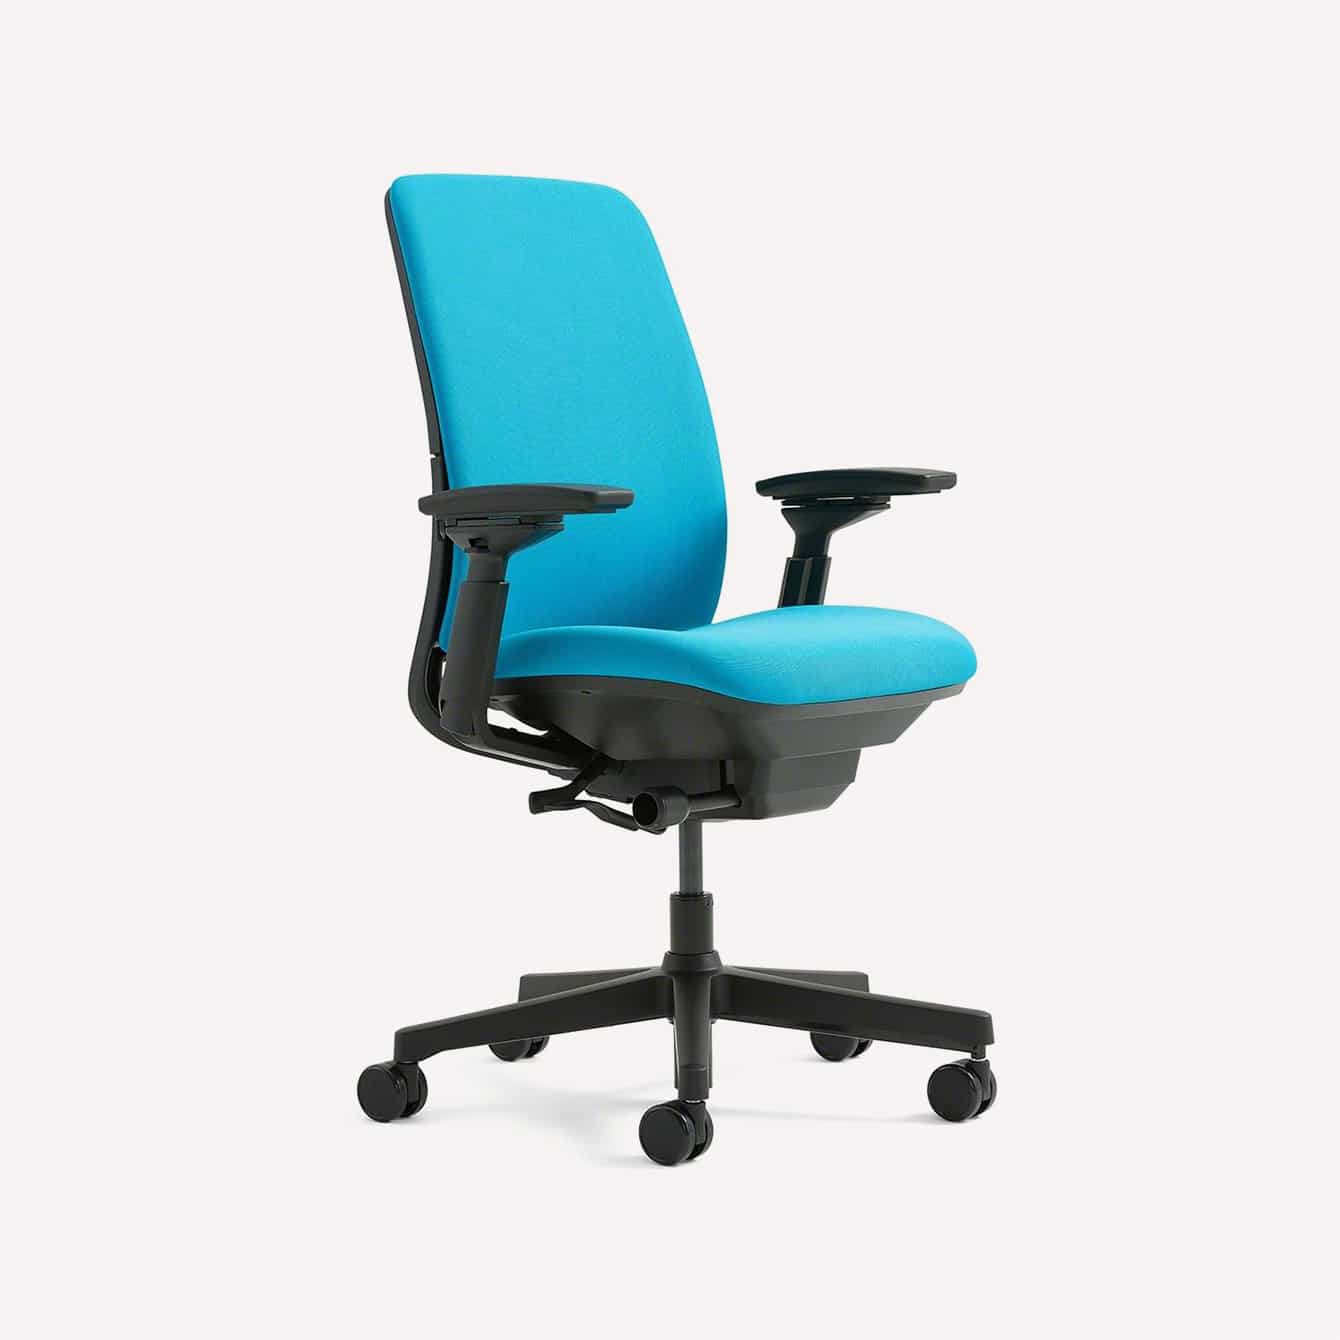 The 9 Best Desk Chairs for Short People - The Modest Man